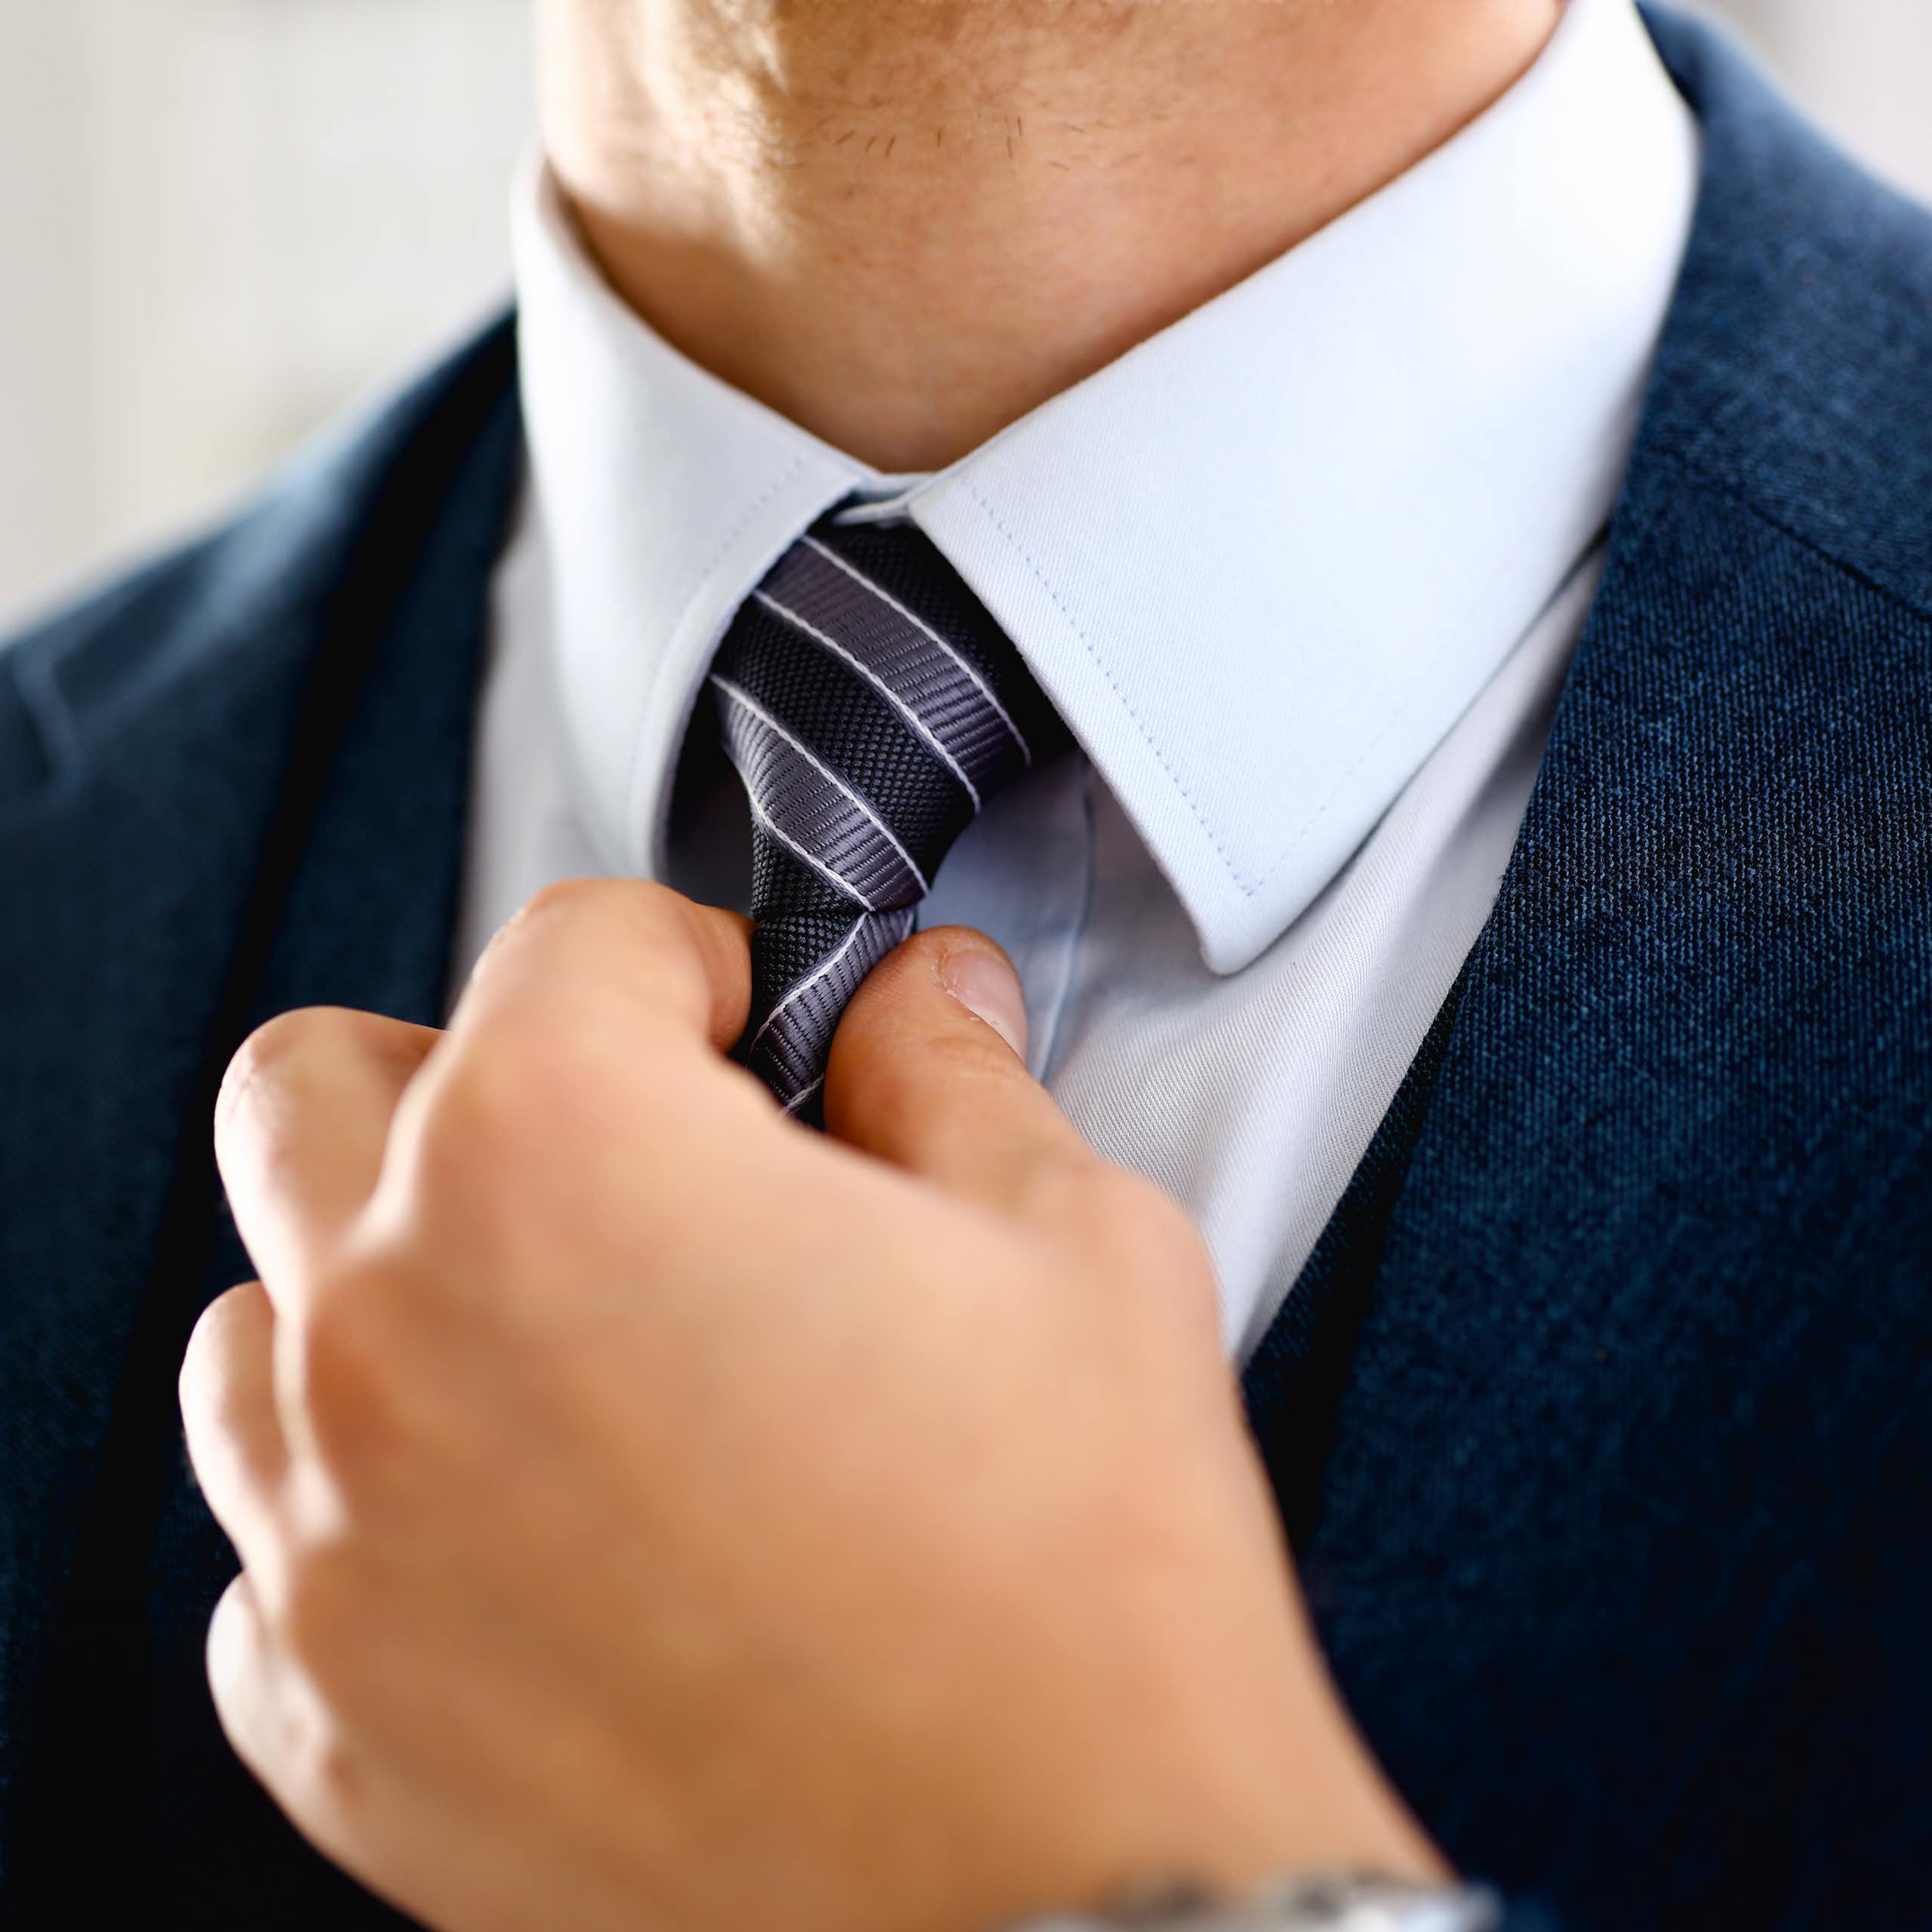 Closeup of a man's hand adjusting a navy blue tie against a light blue collared shirt and navy suit jacket